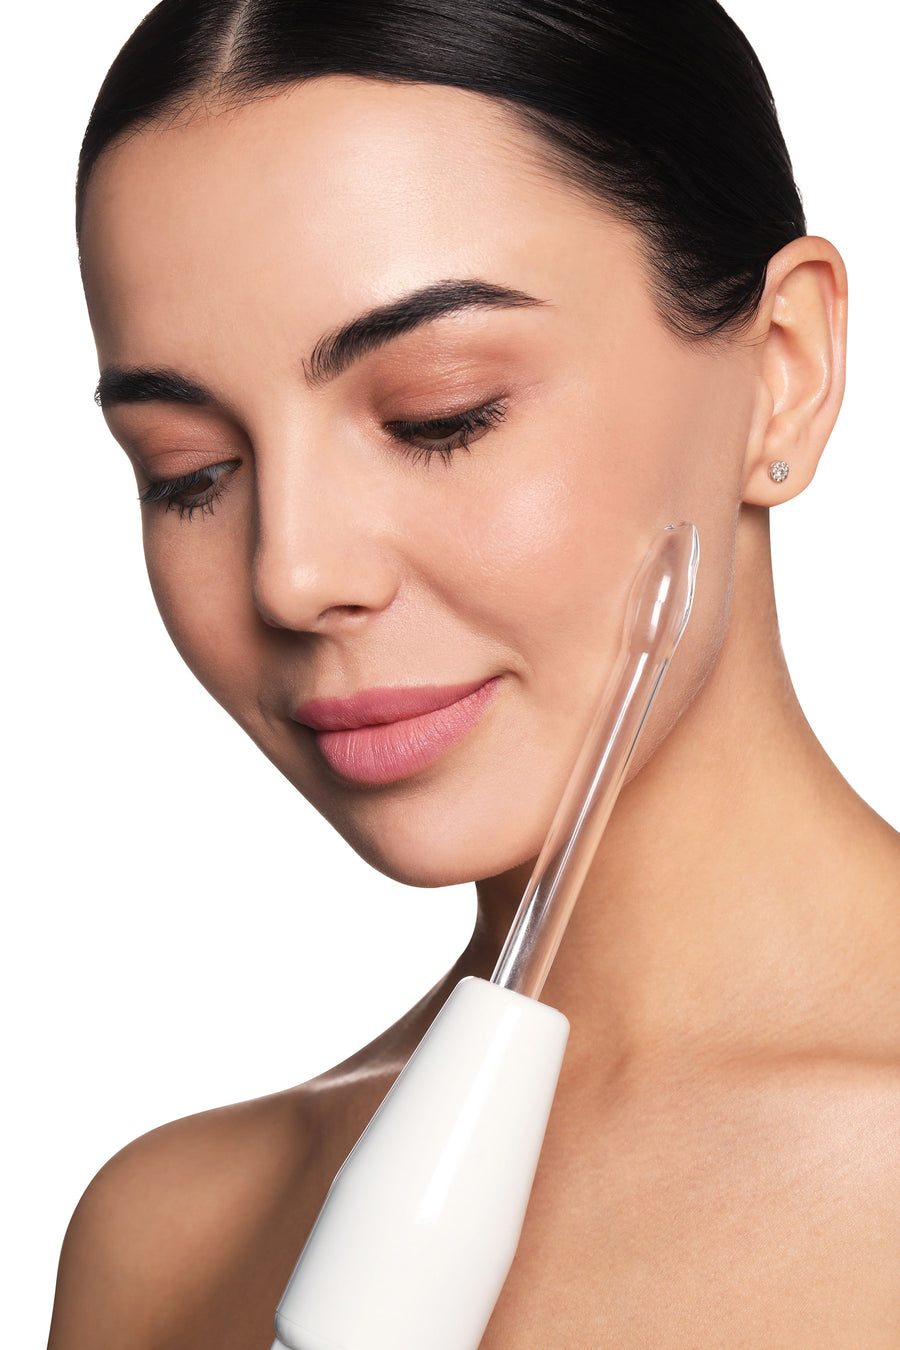 Theia Professional Skin Therapy Wand